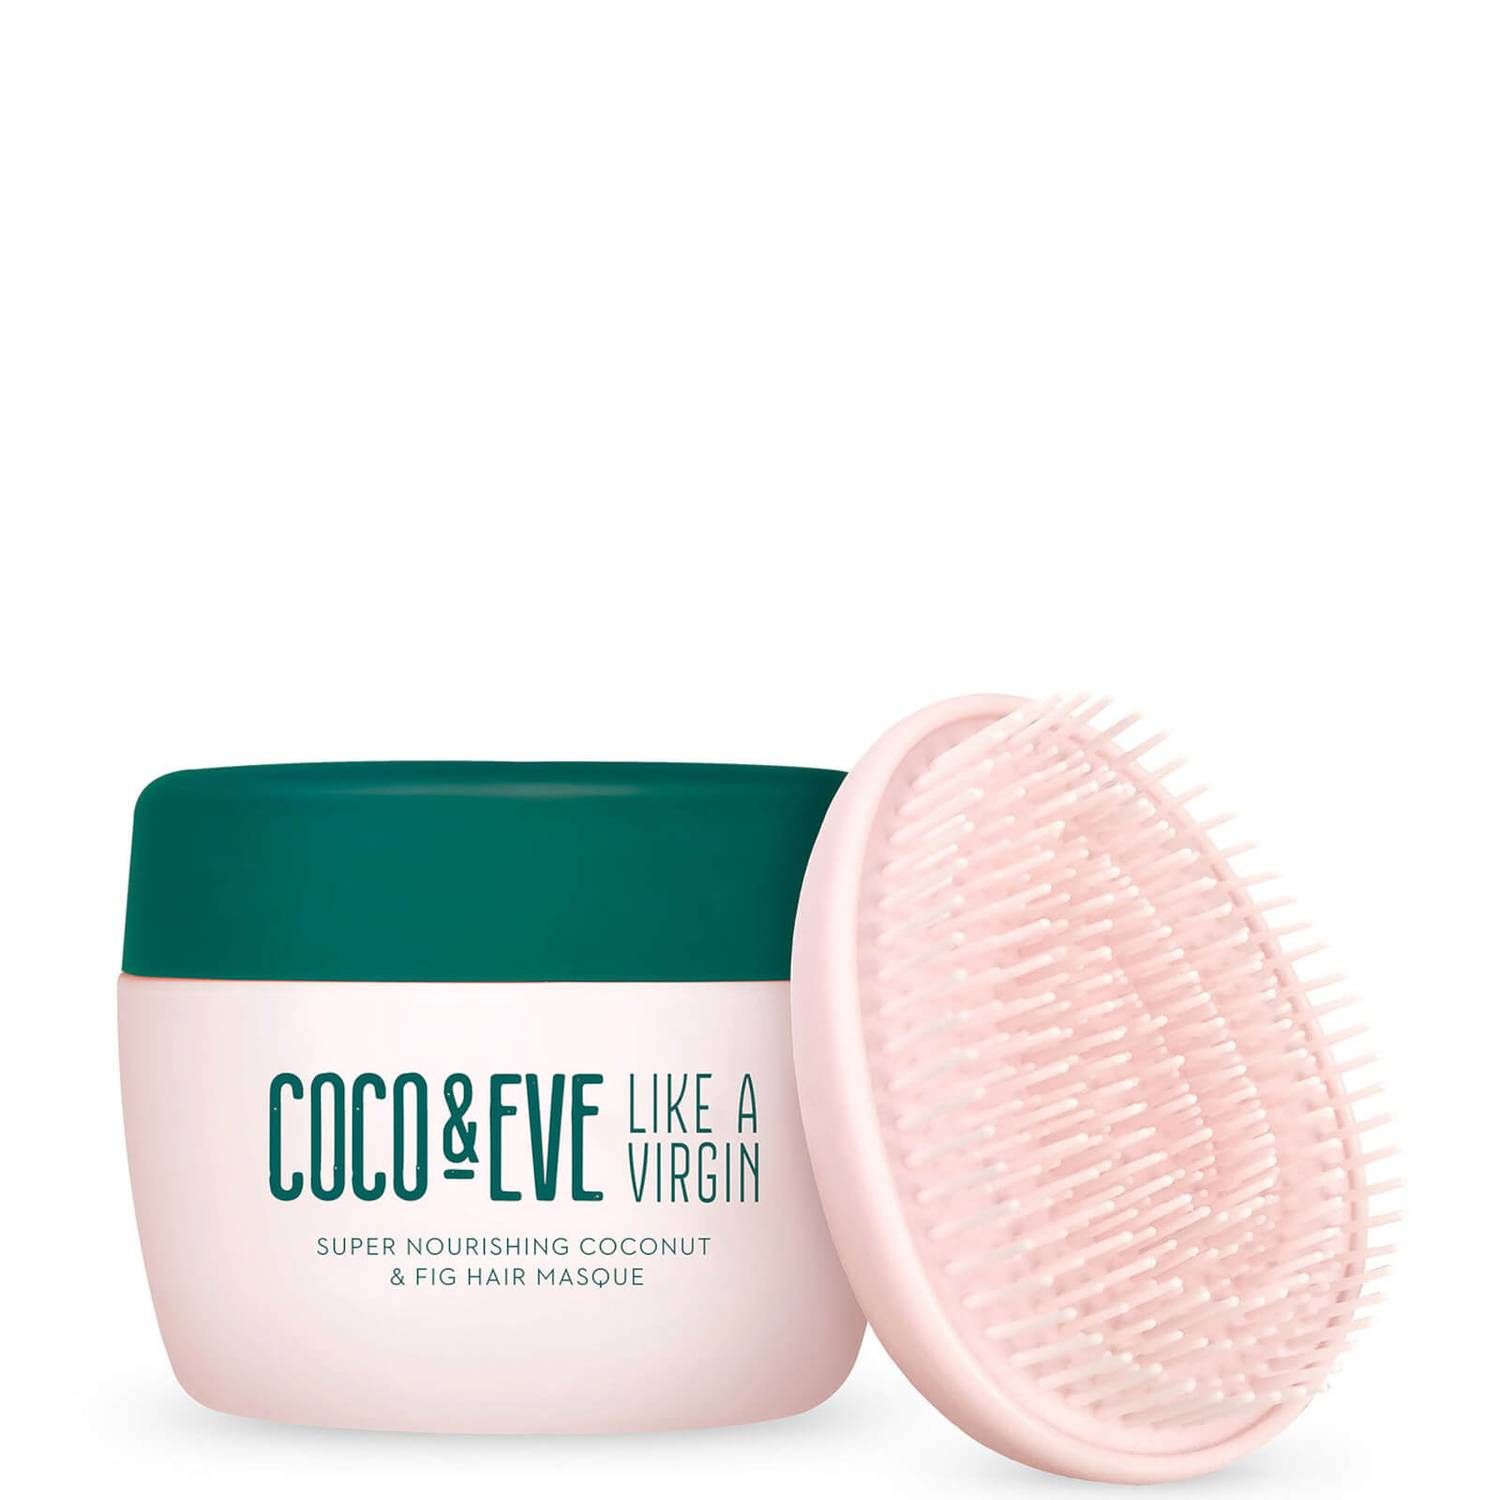 Coco & Eve Super Nourishing Coconut & Fig Hair Masque (Various Sizes) | Cult Beauty